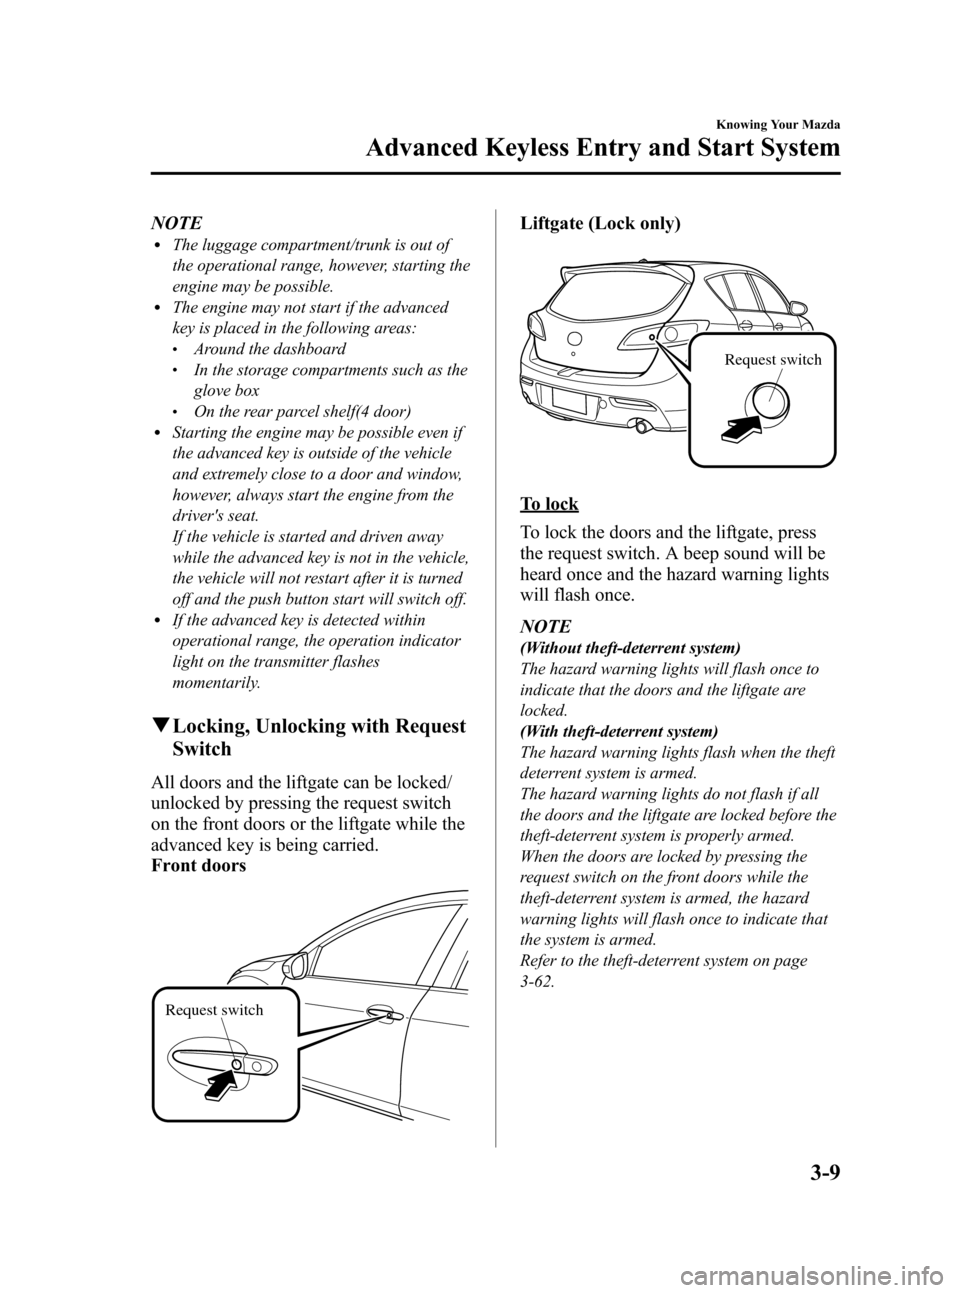 MAZDA MODEL 3 HATCHBACK 2010  Owners Manual (in English) Black plate (85,1)
NOTElThe luggage compartment/trunk is out of
the operational range, however, starting the
engine may be possible.
lThe engine may not start if the advanced
key is placed in the foll